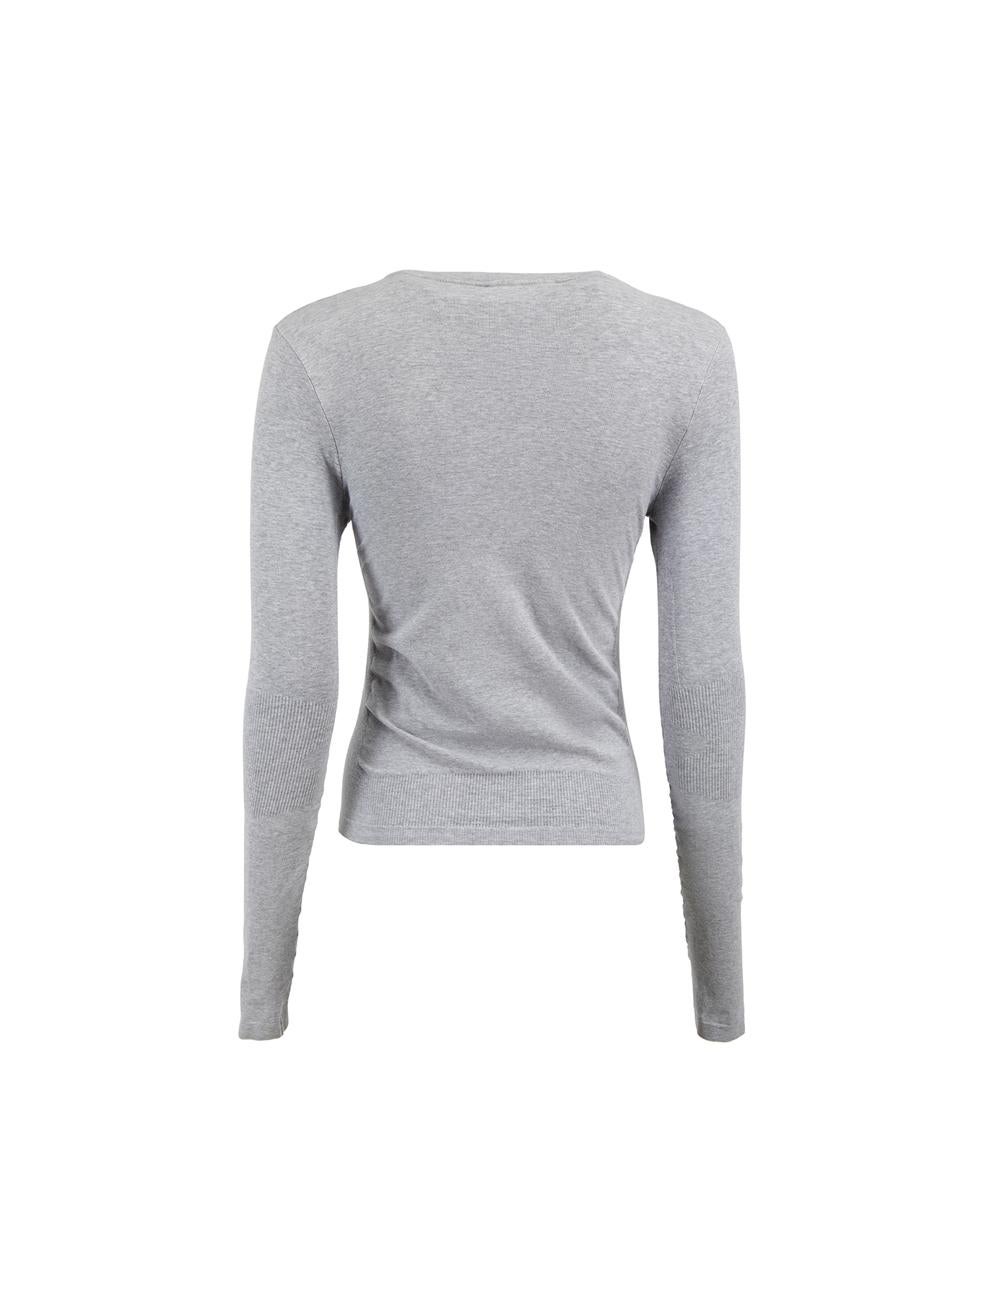 Prada Sport Grey Ribbed Knit Accent Long Sleeve Top Size M In Good Condition For Sale In London, GB